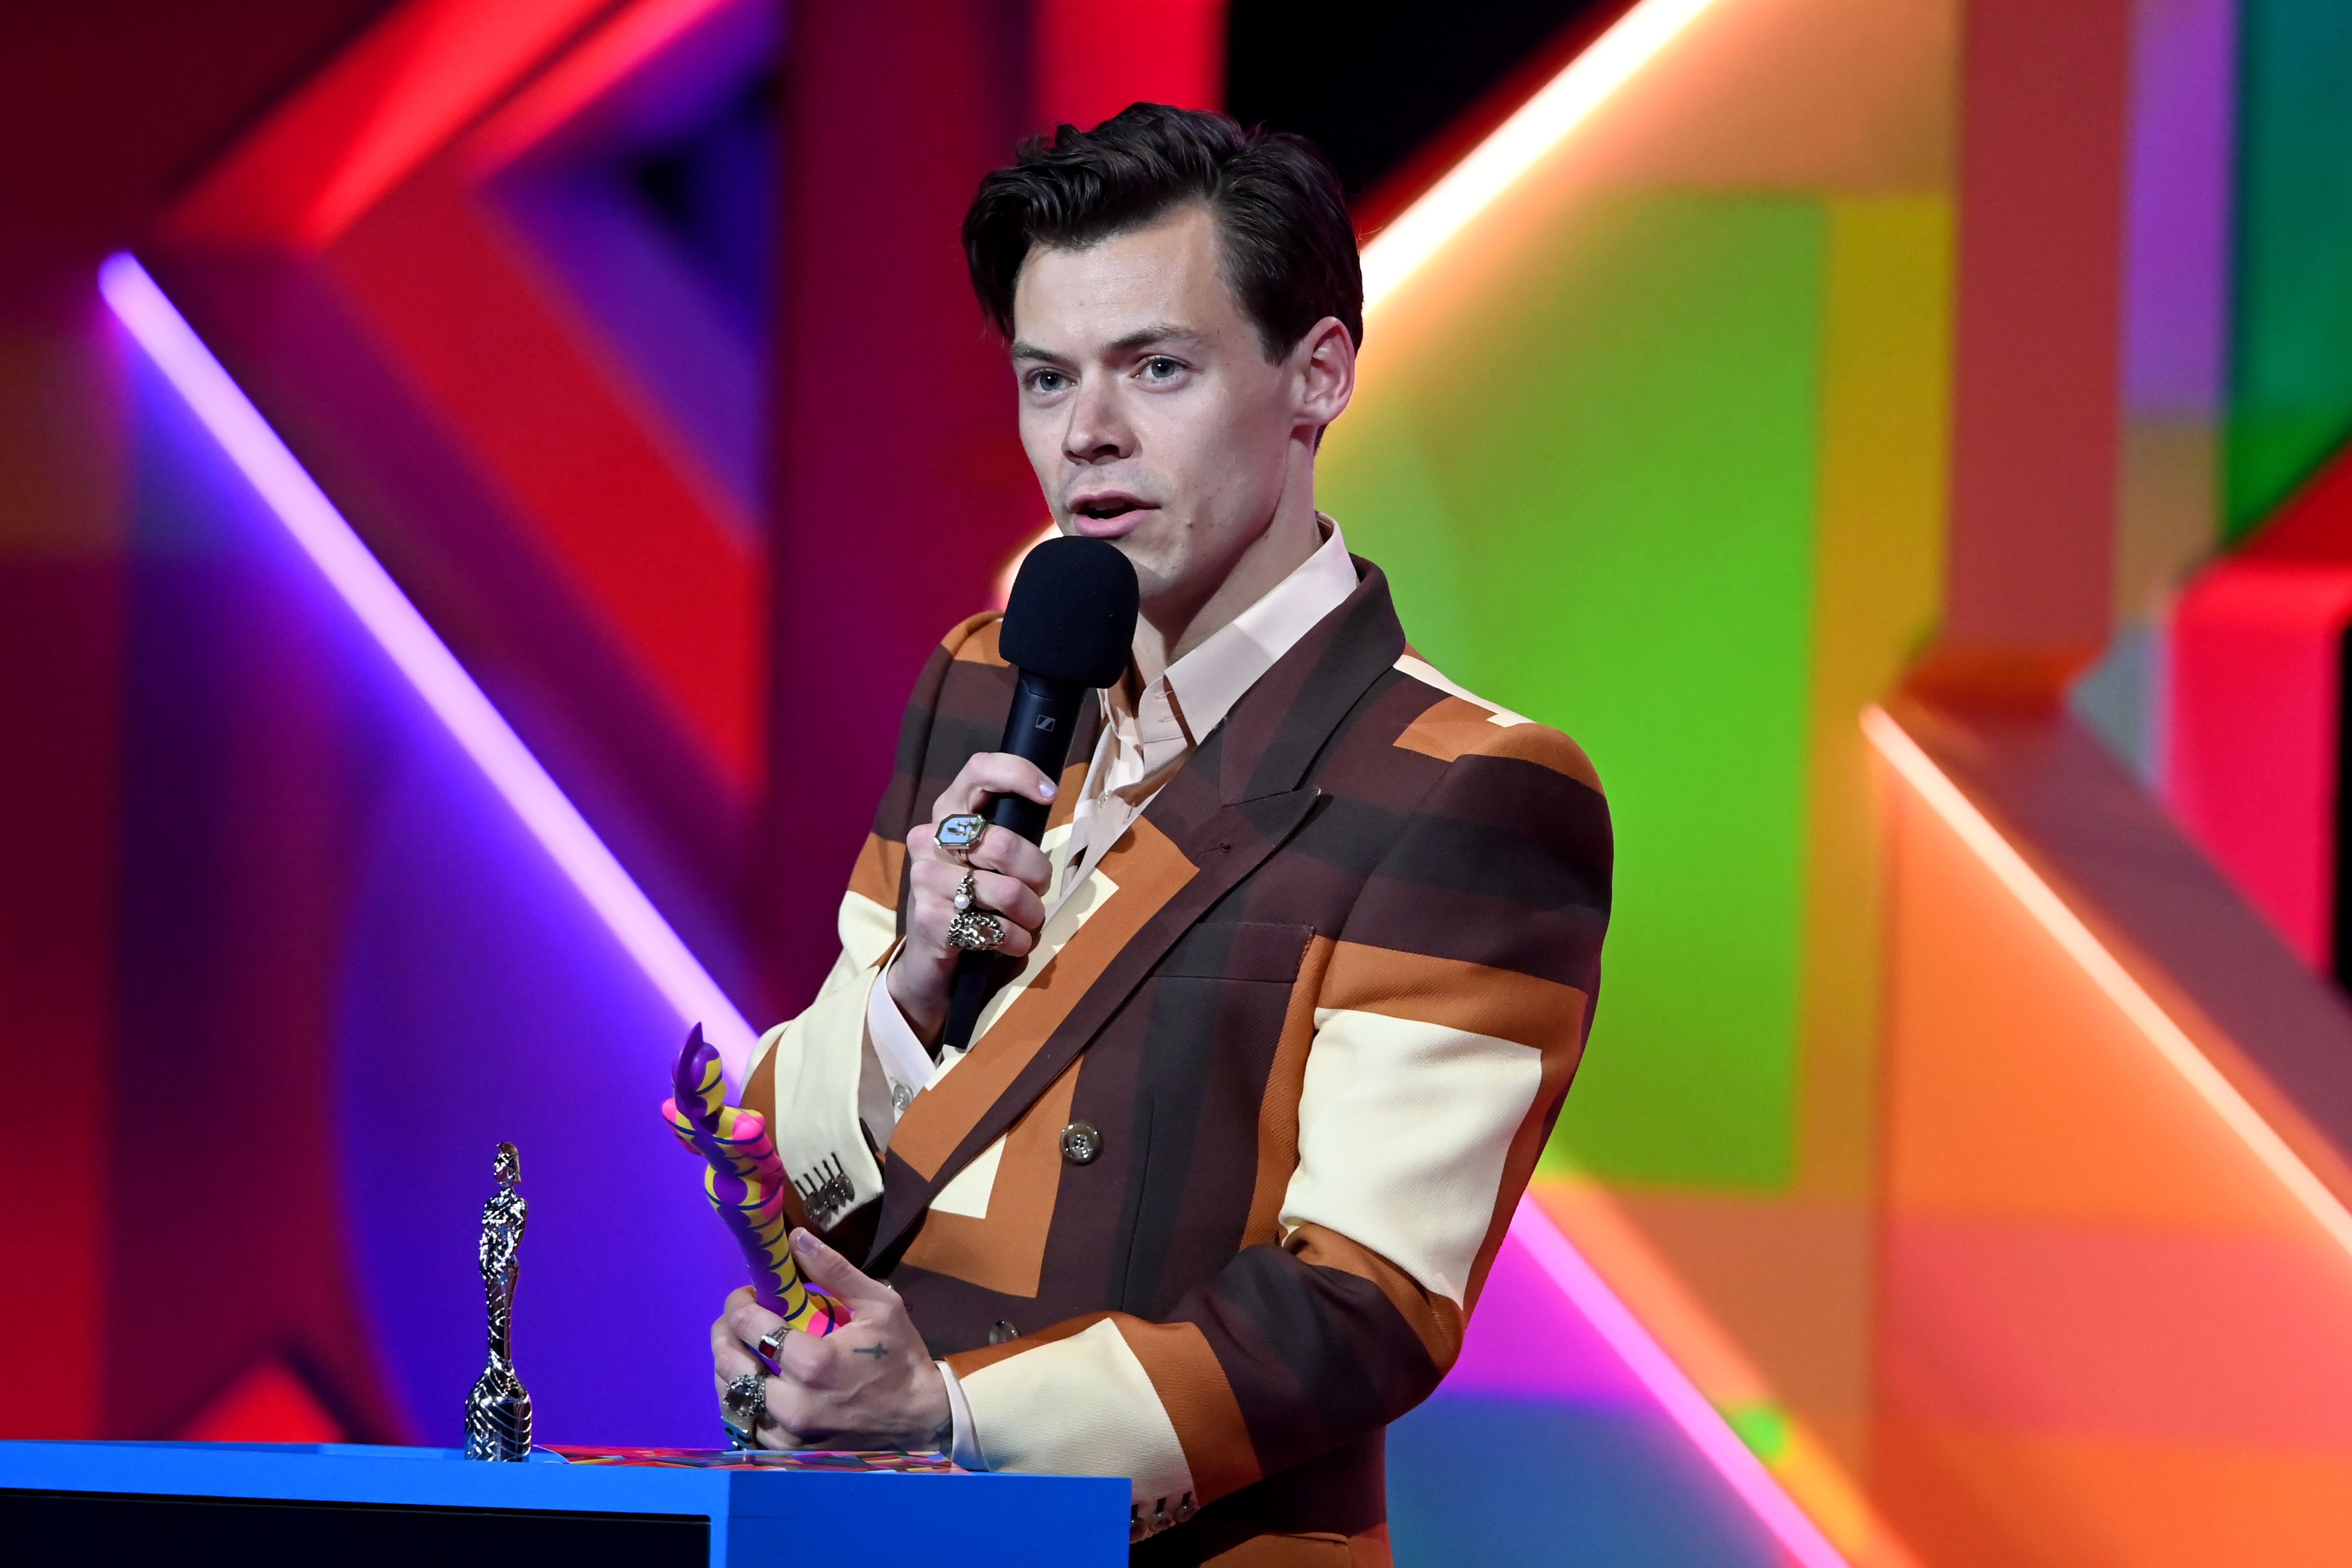 Harry Styles Shares How Going to Therapy Has Changed Him